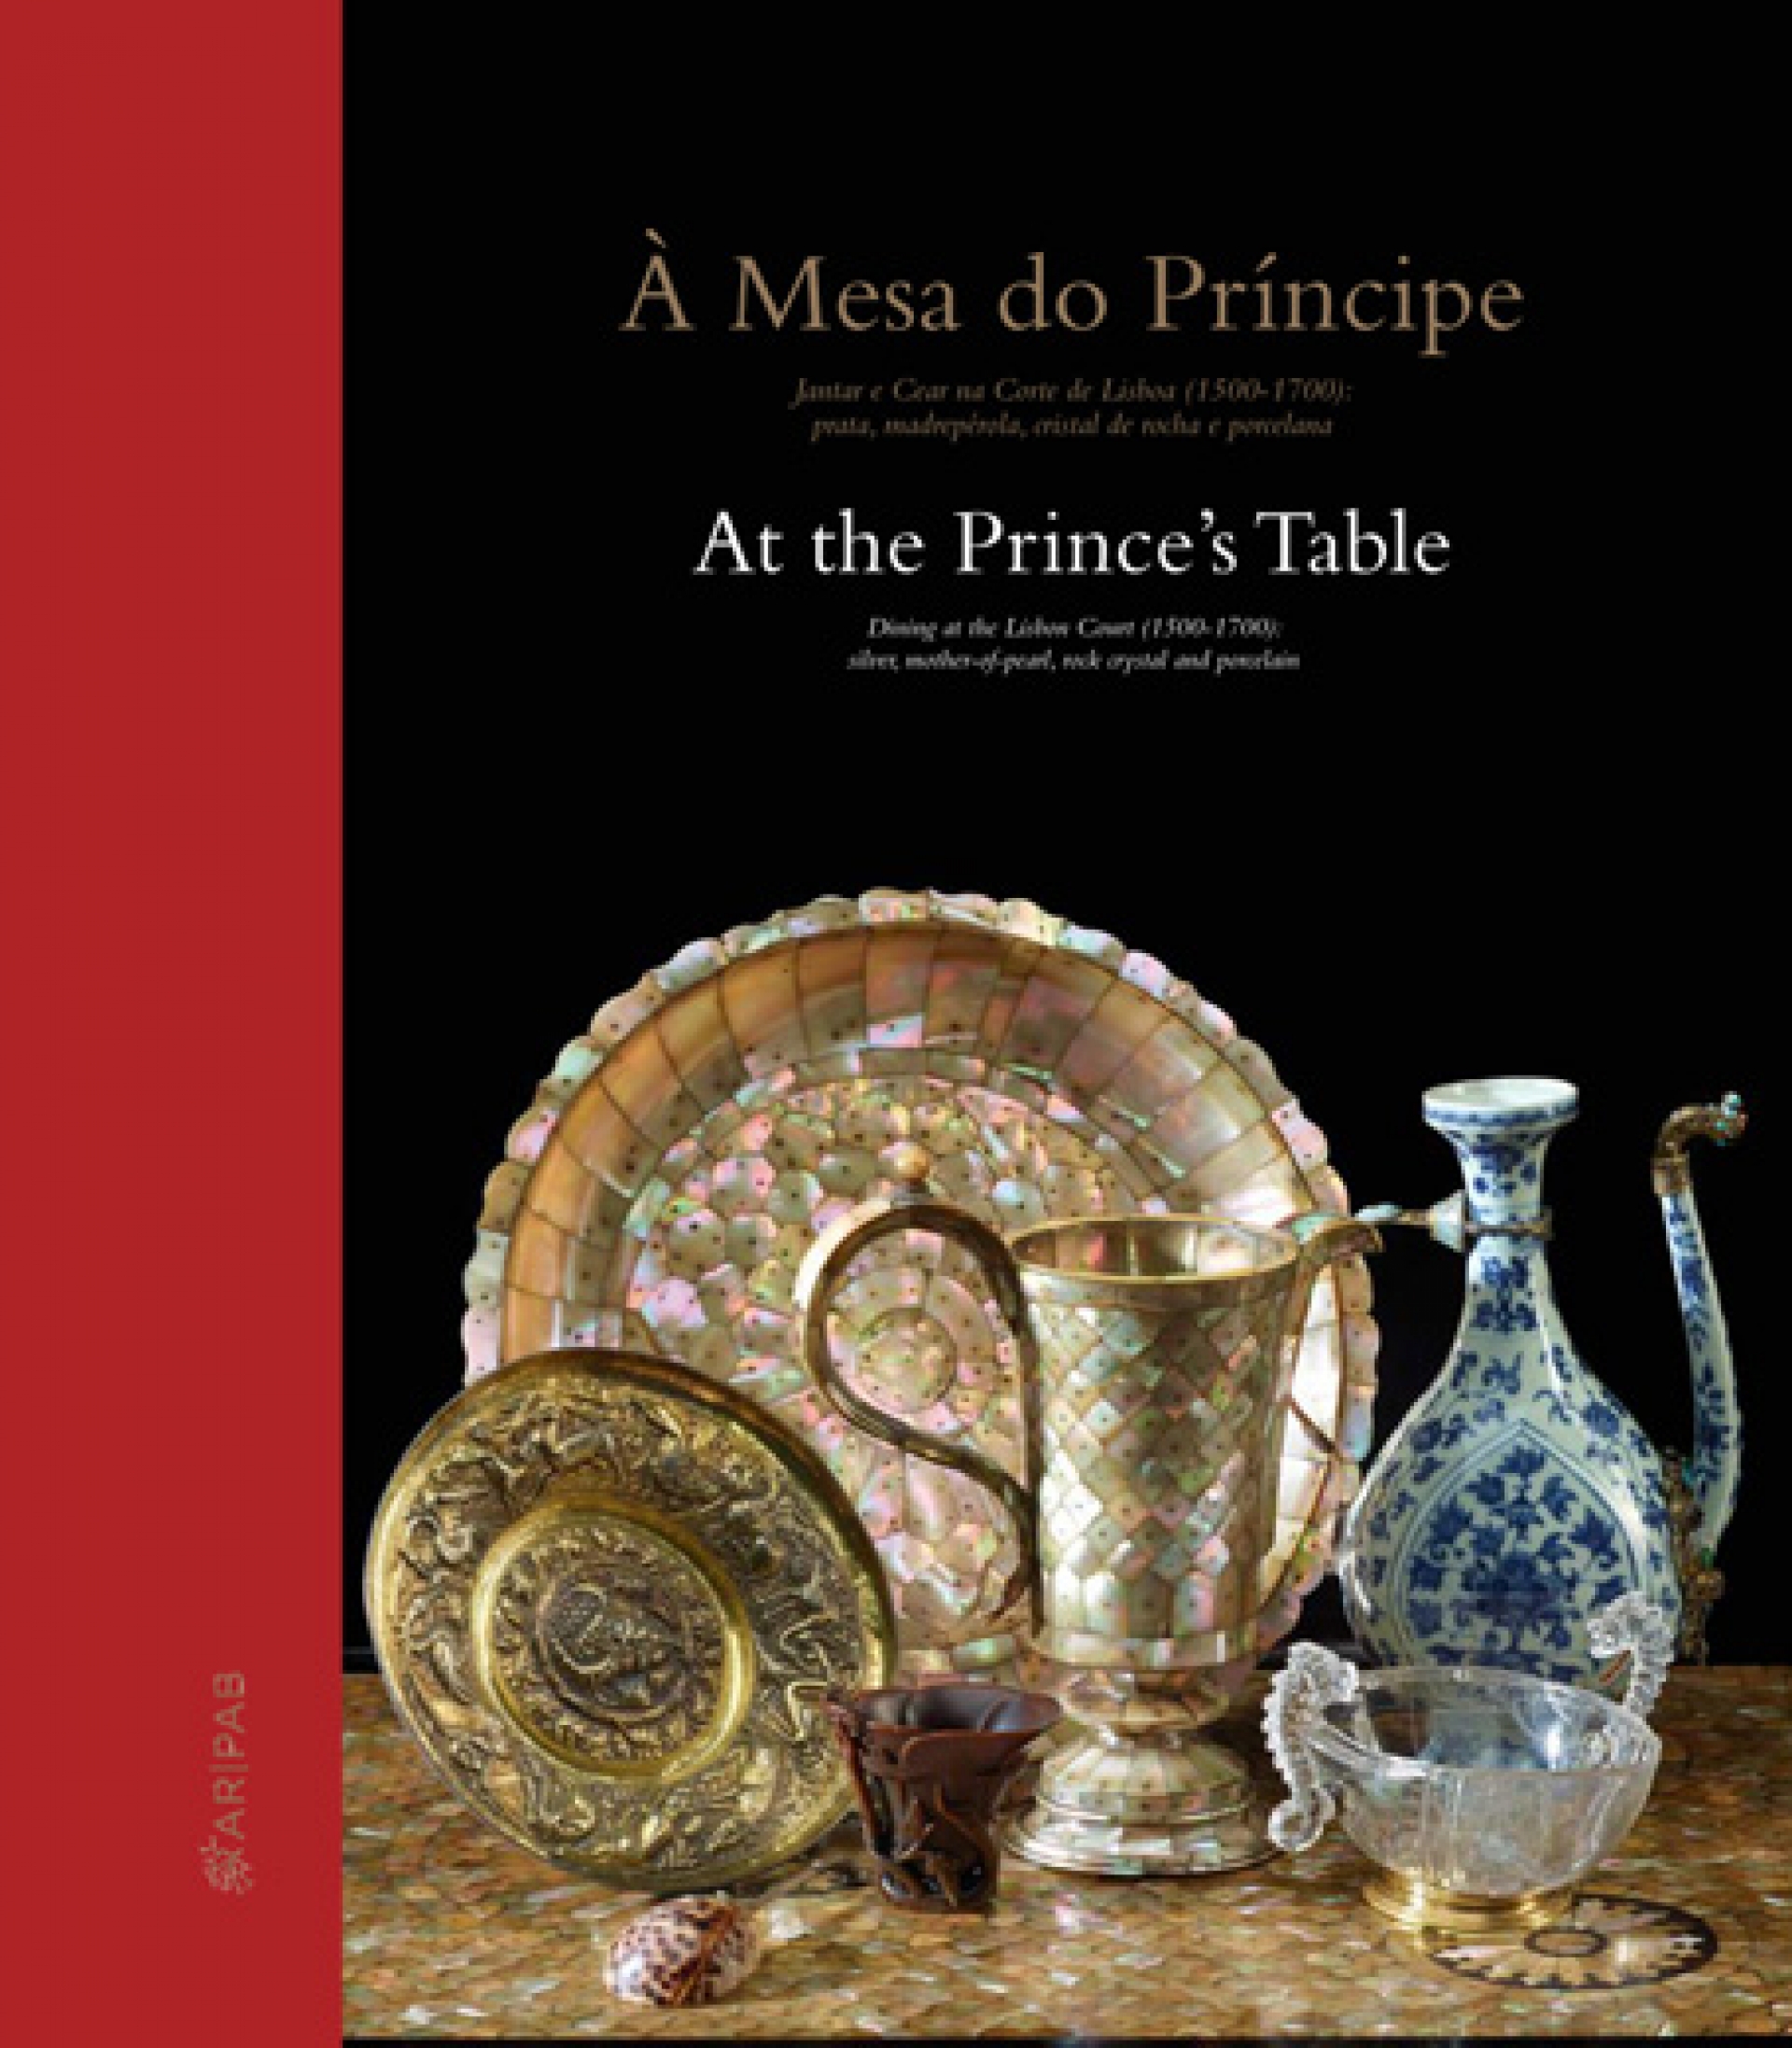 At the Prince’s Table